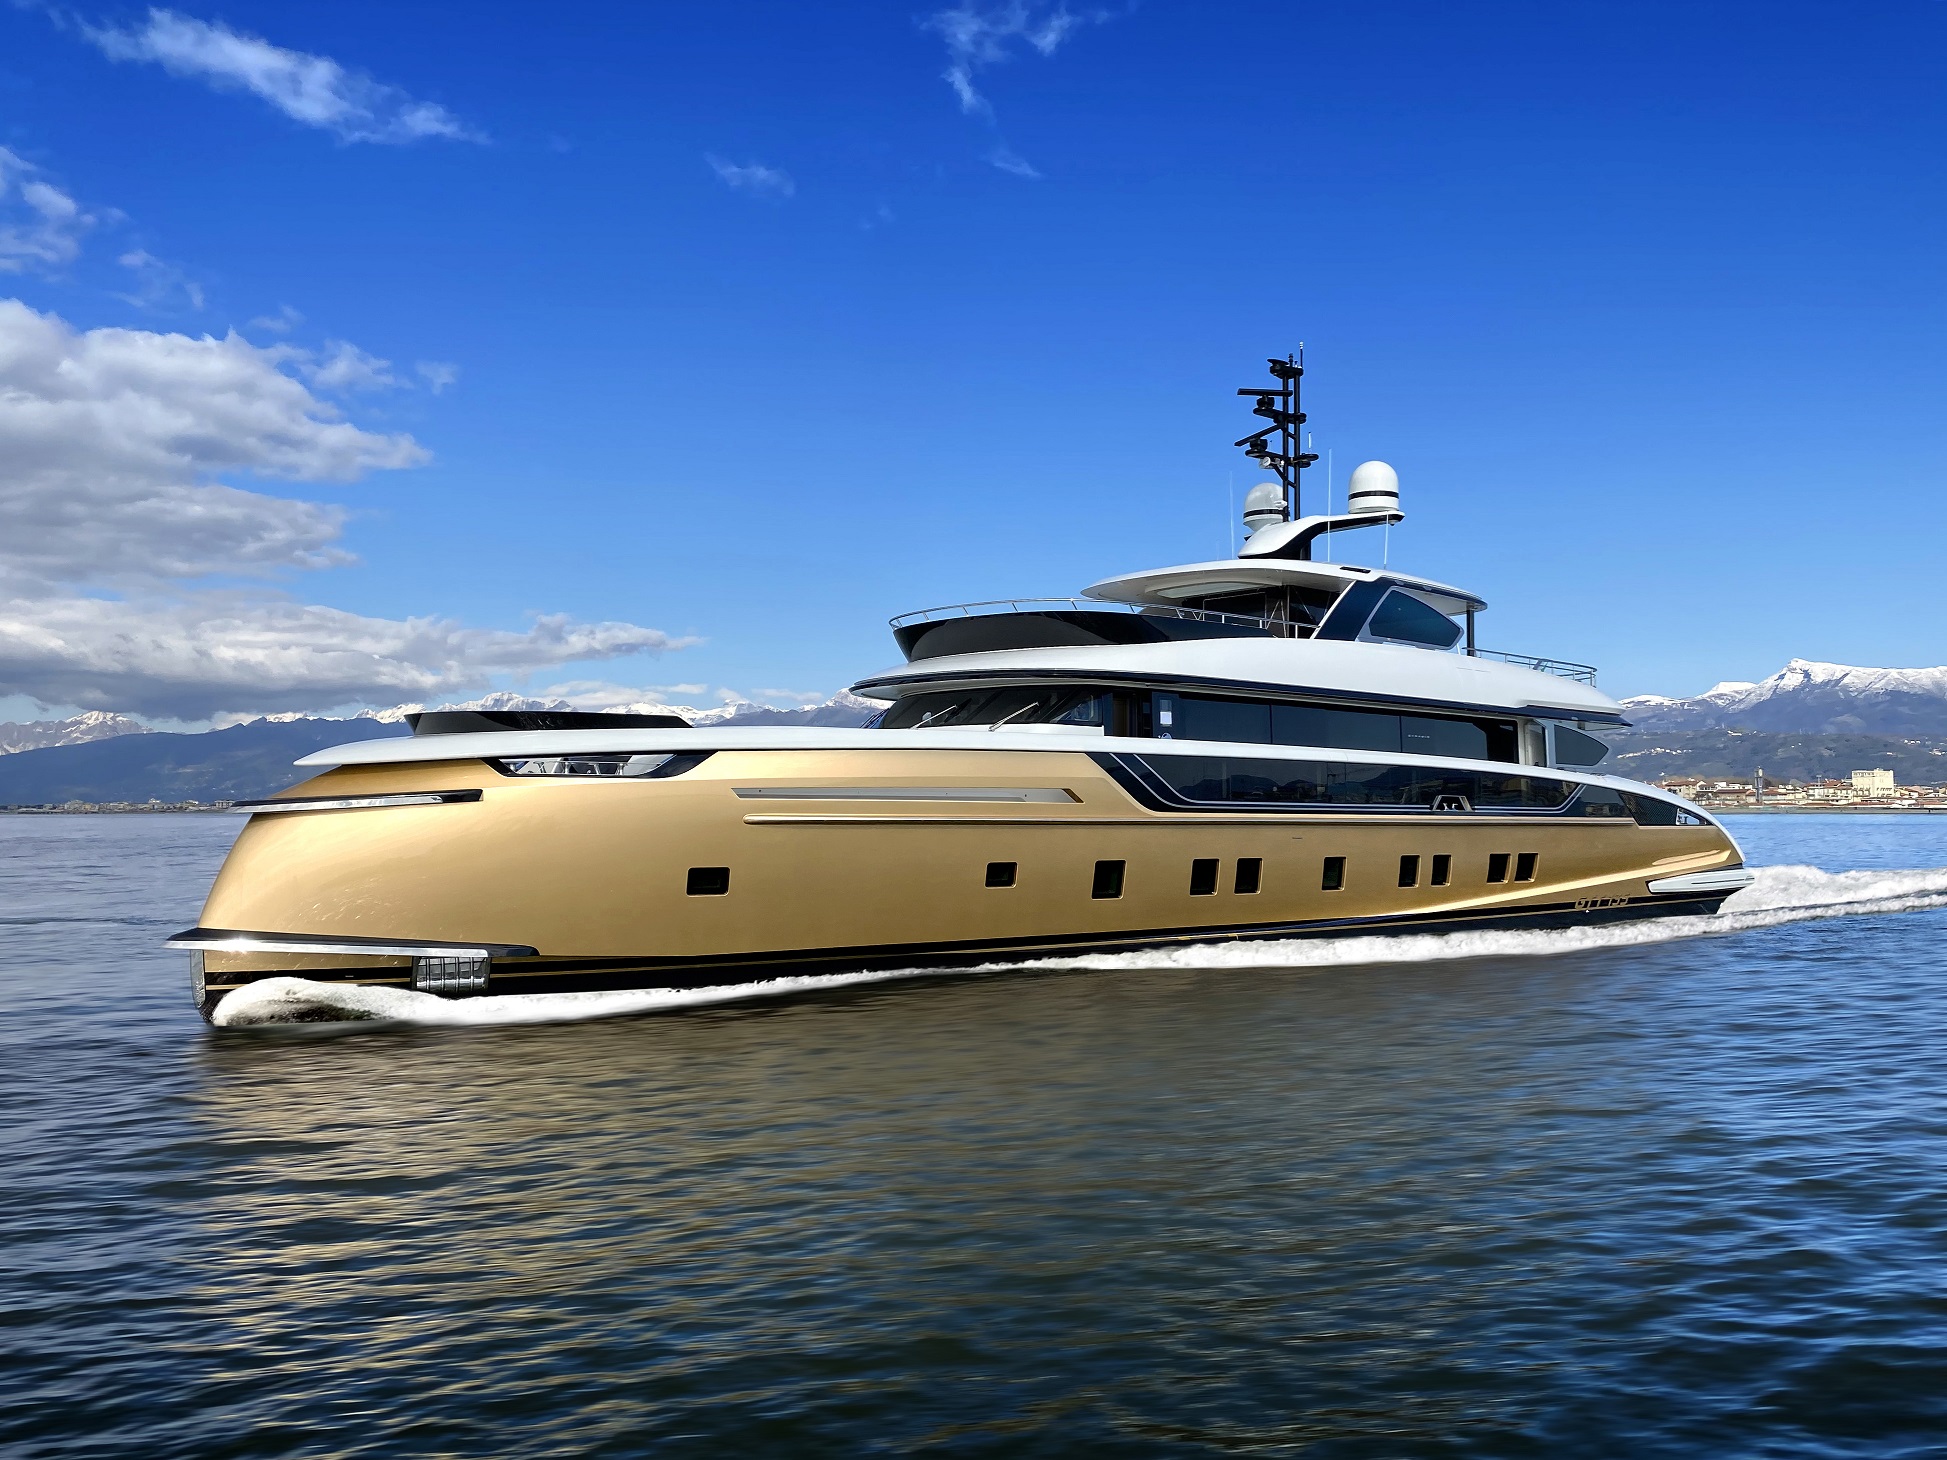 Dynamiq Flagship 41-Meter ‘Stefania’ Is Here To Impress!